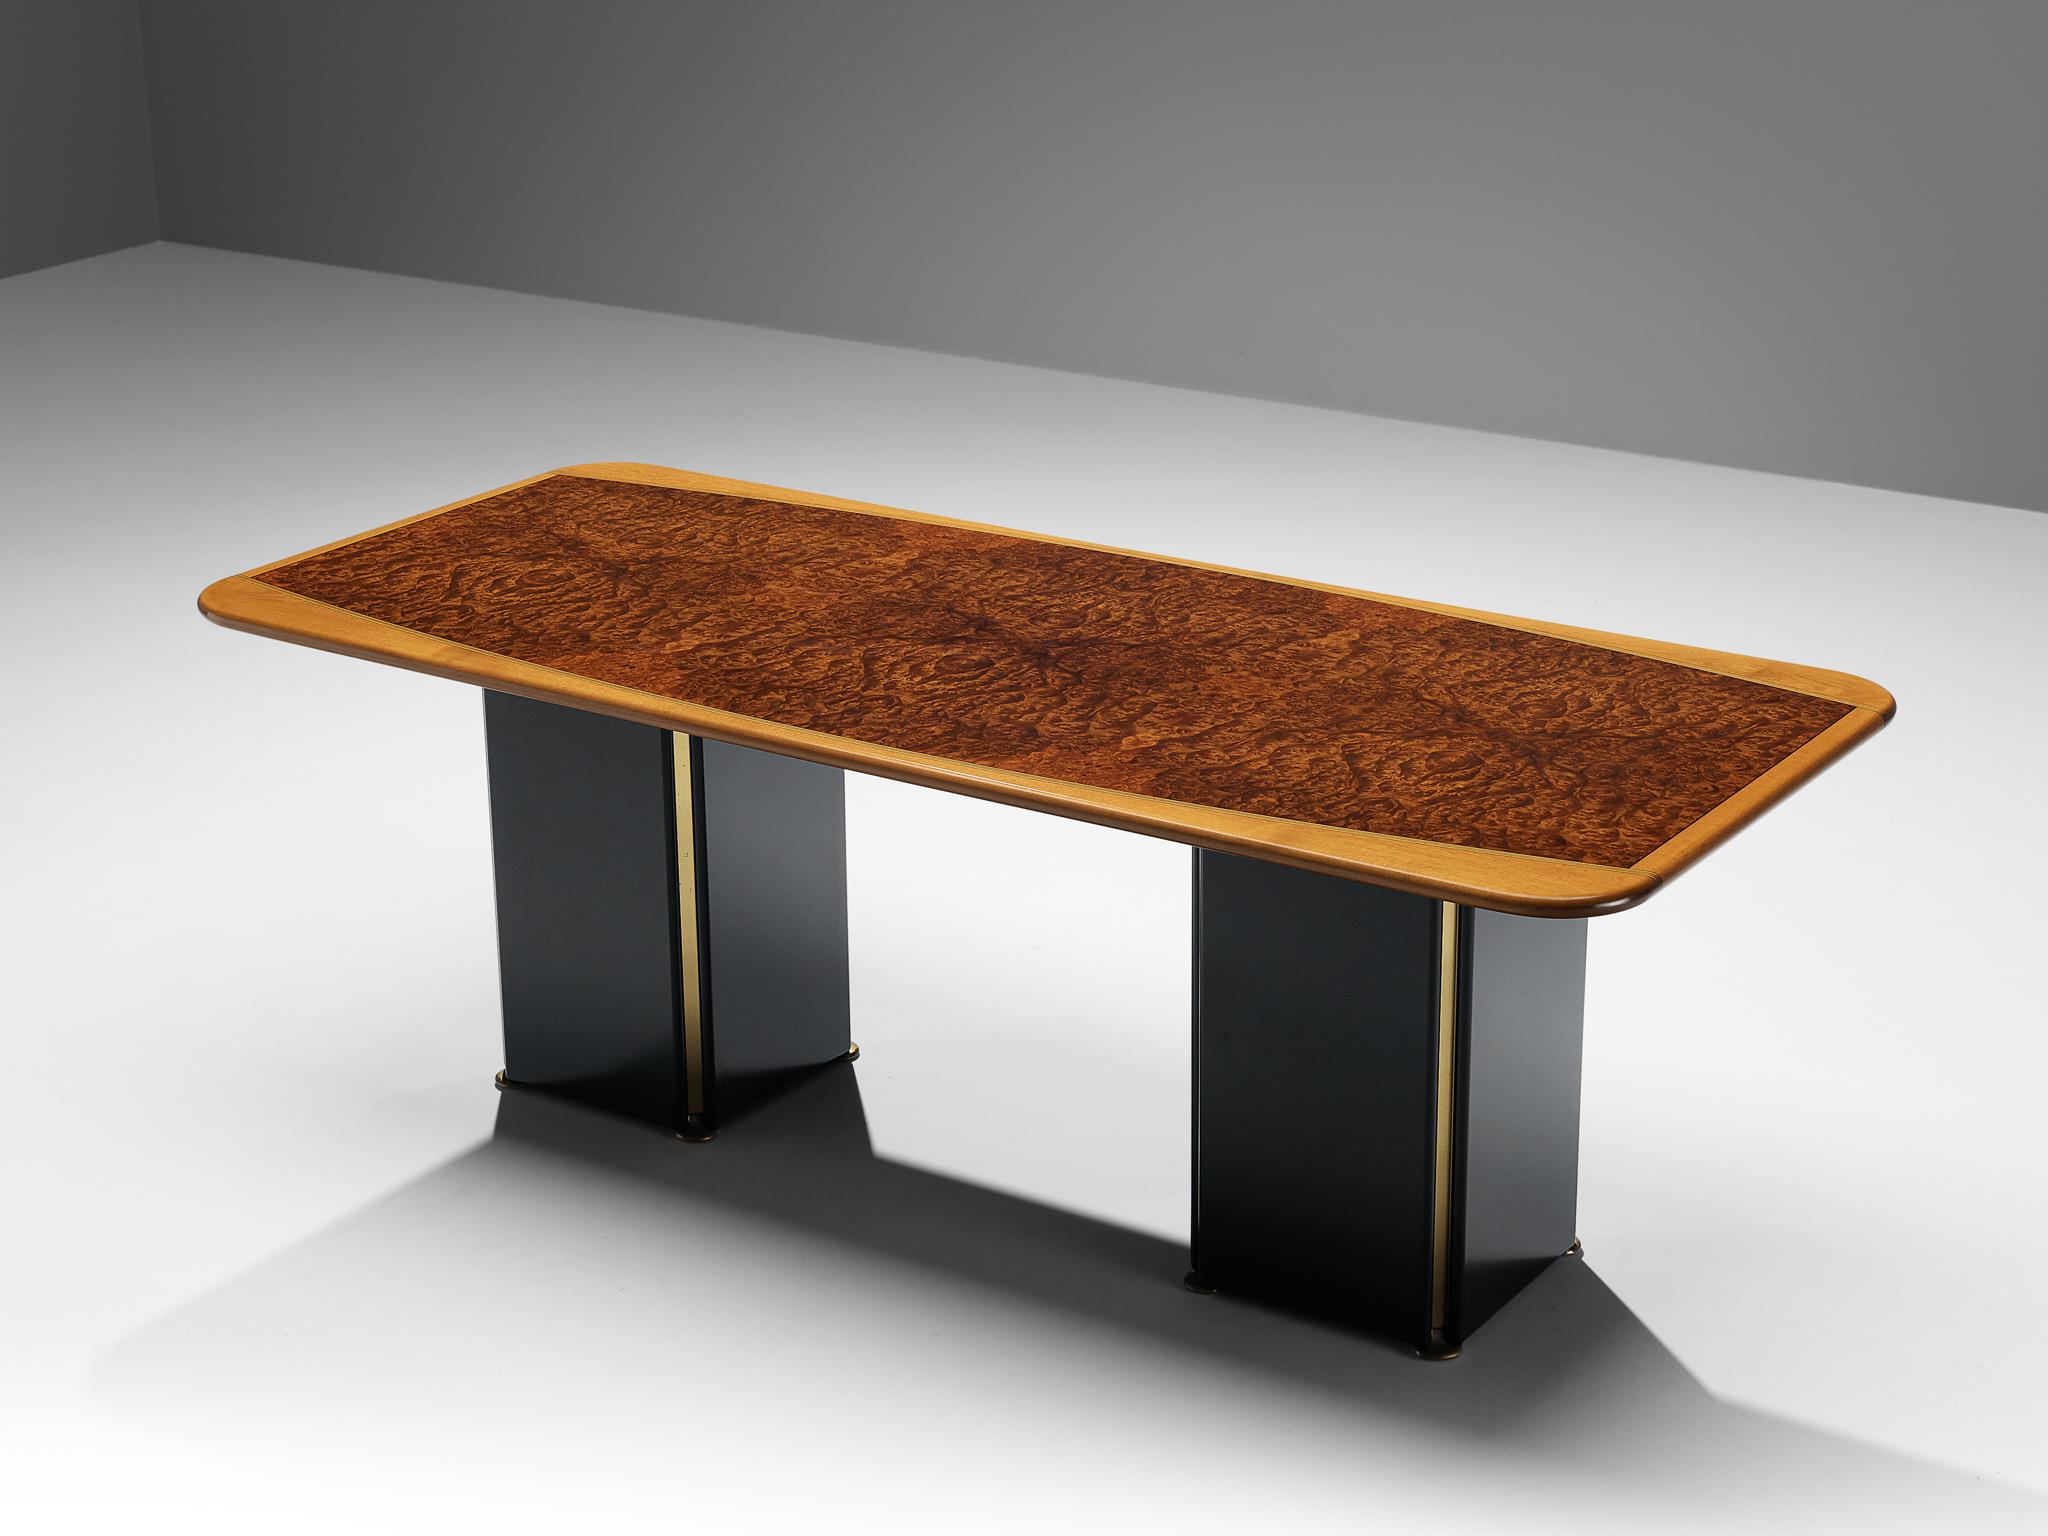 Afra & Tobia Scarpa for Maxalto, 'Artona' dining table, walnut, walnut burl, lacquered wood, brass, ebony, Italy, 1975/1979 

This table was designed by Afra & Tobia Scarpa within the ‘Artona’ line for Maxalto. This particular model is rare. The